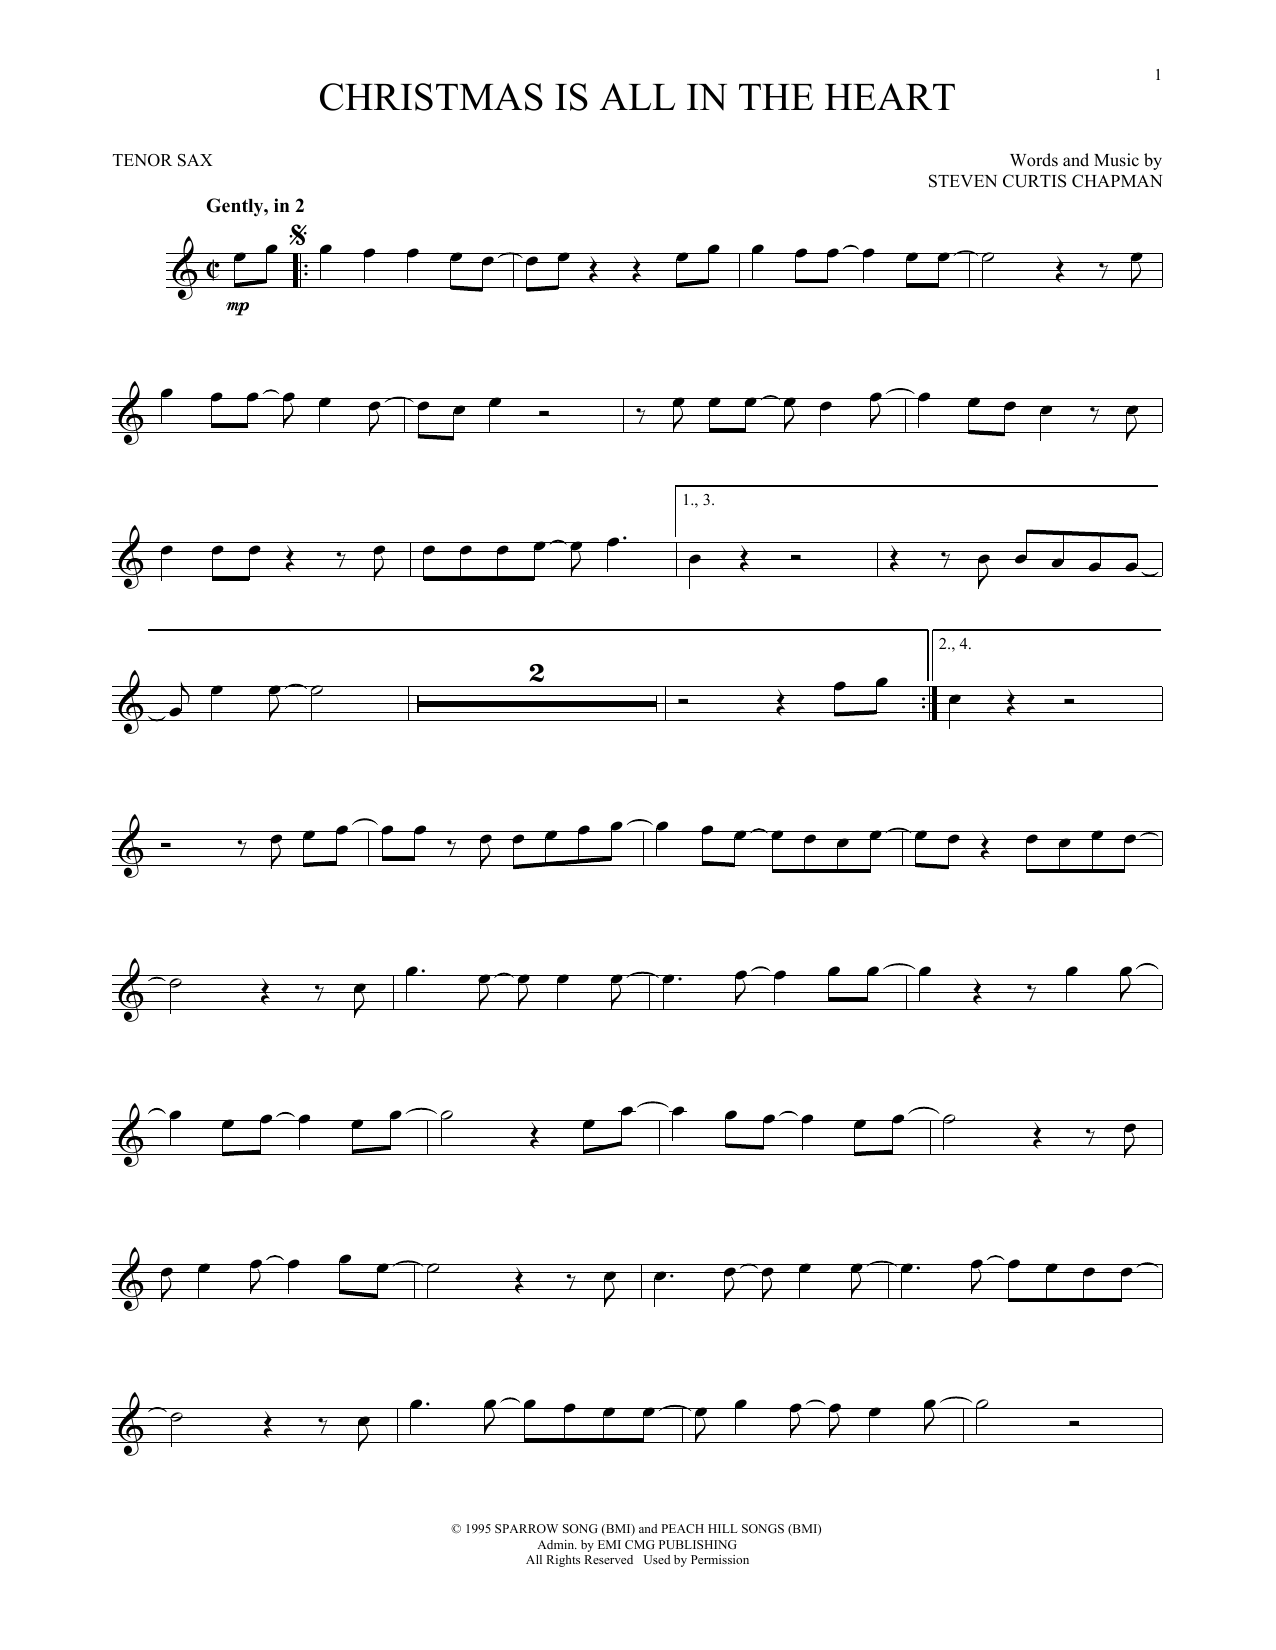 Download Steven Curtis Chapman Christmas Is All In The Heart Sheet Music